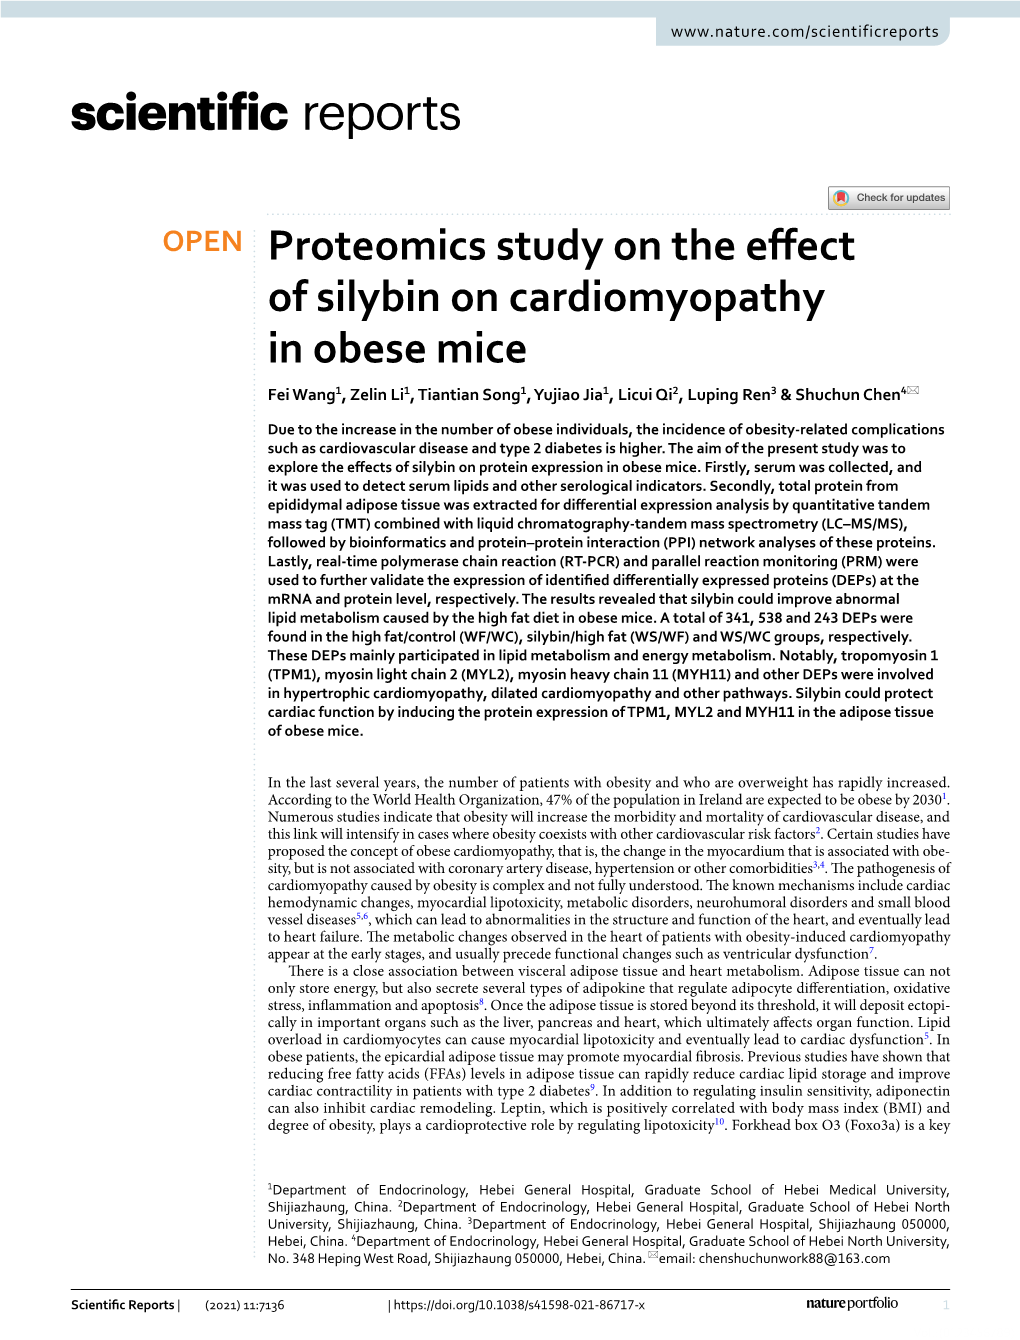 Proteomics Study on the Effect of Silybin on Cardiomyopathy in Obese